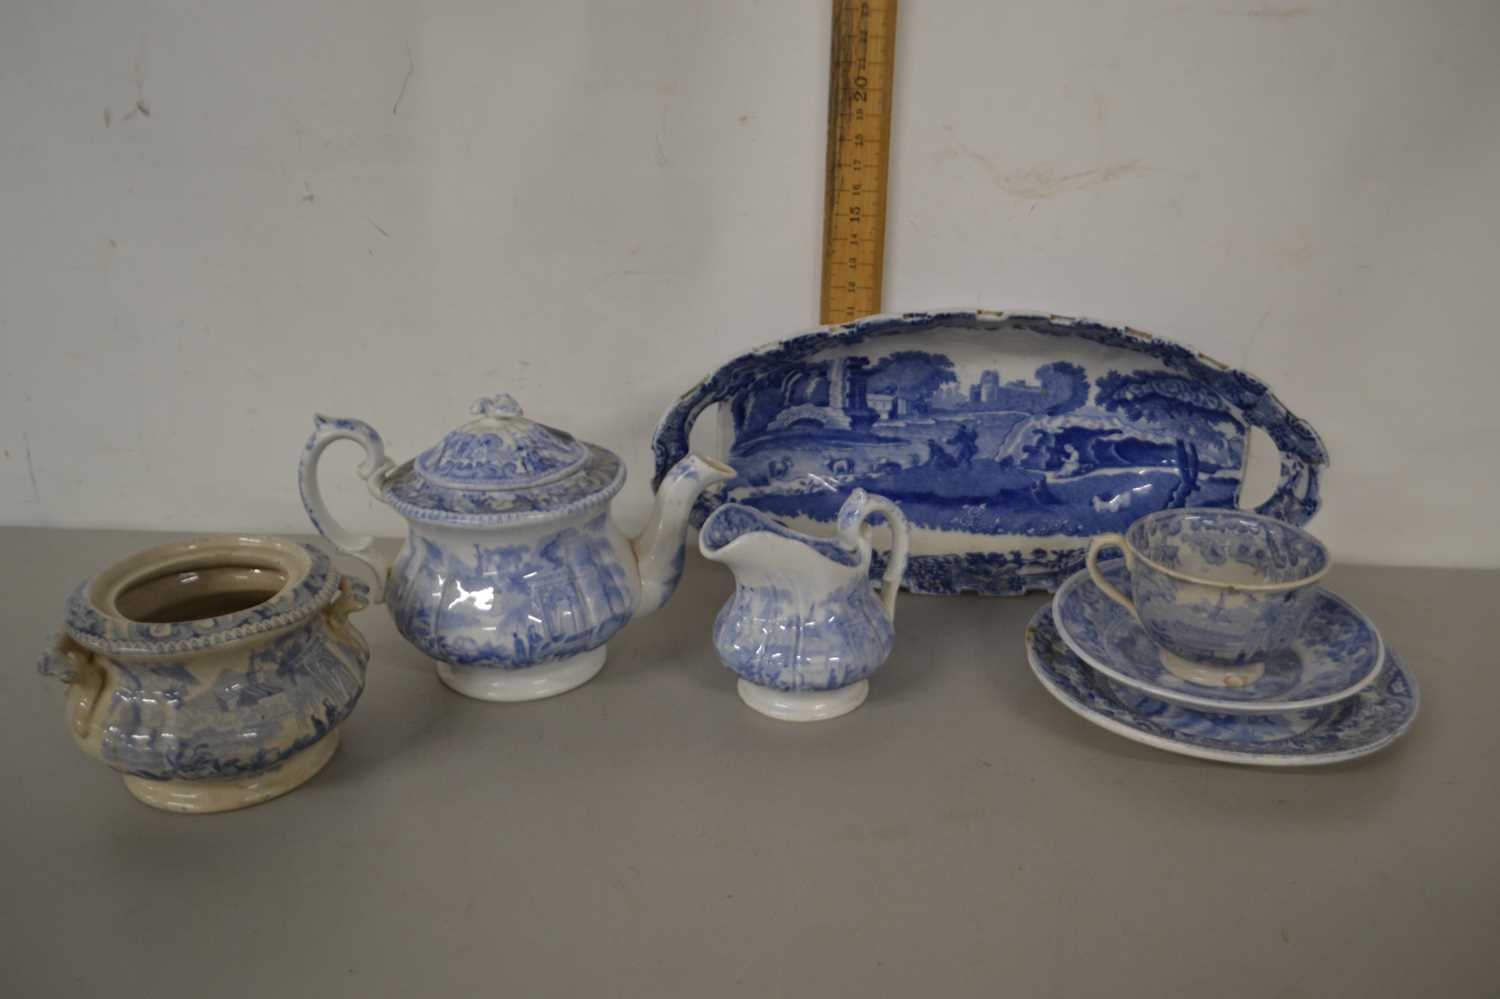 Quantity of Davenport blue and white tea wares and other items